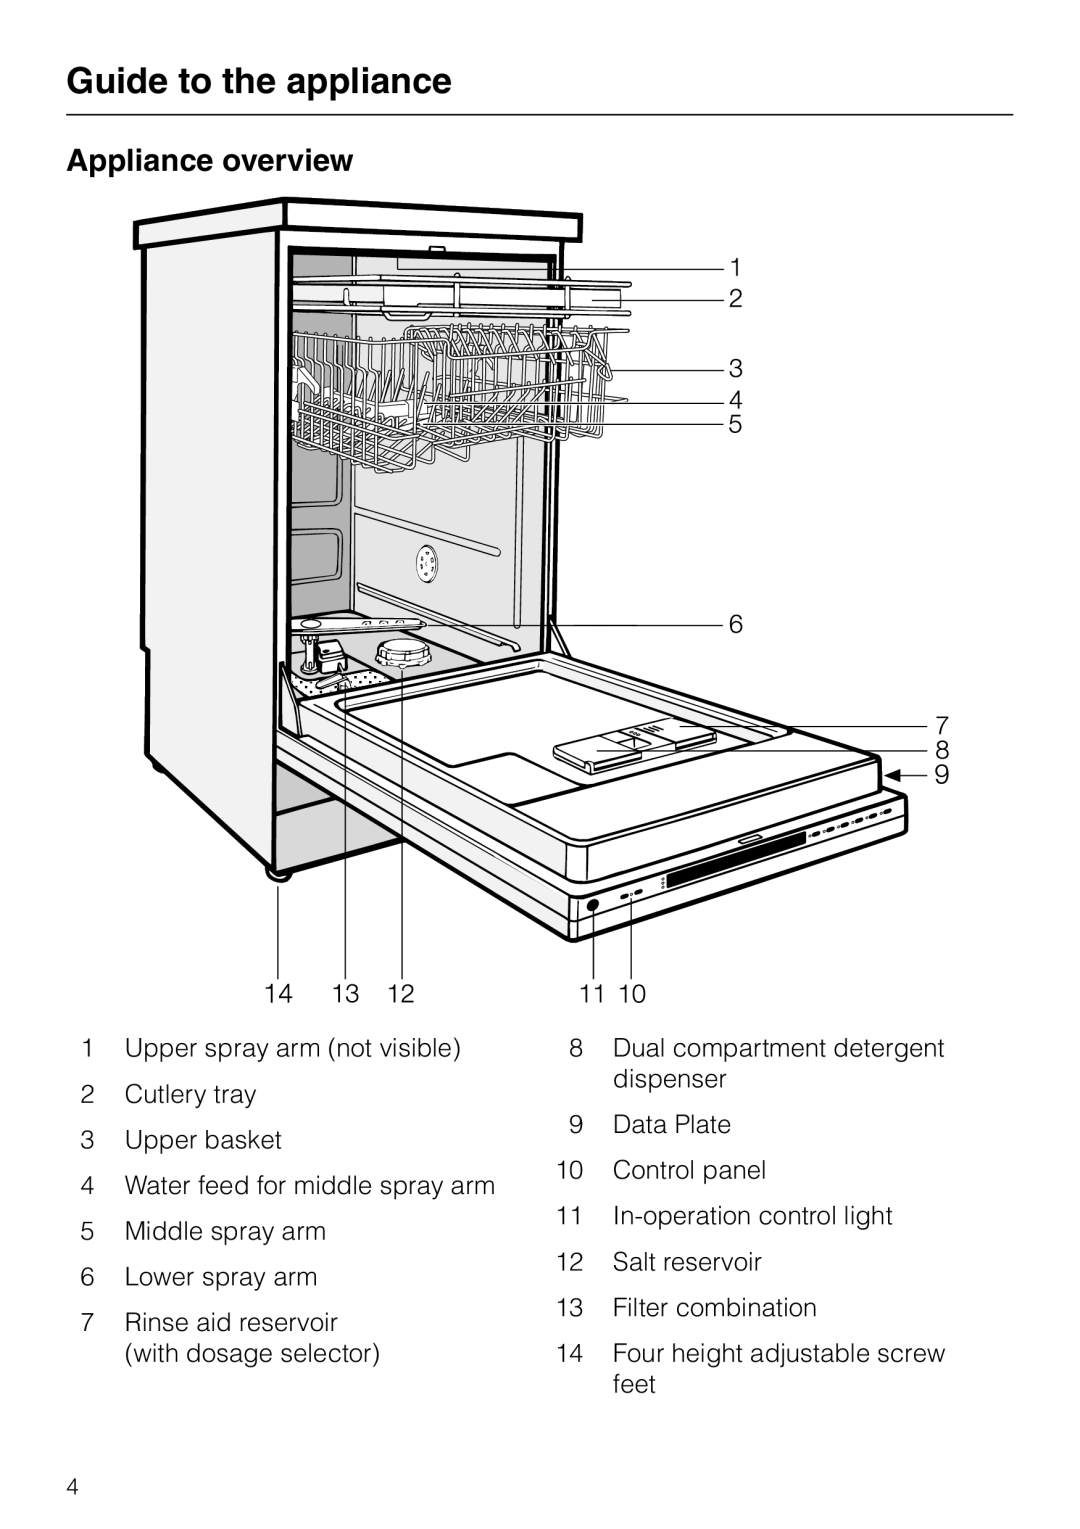 Miele dishwashers installation instructions Guide to the appliance, Appliance overview 